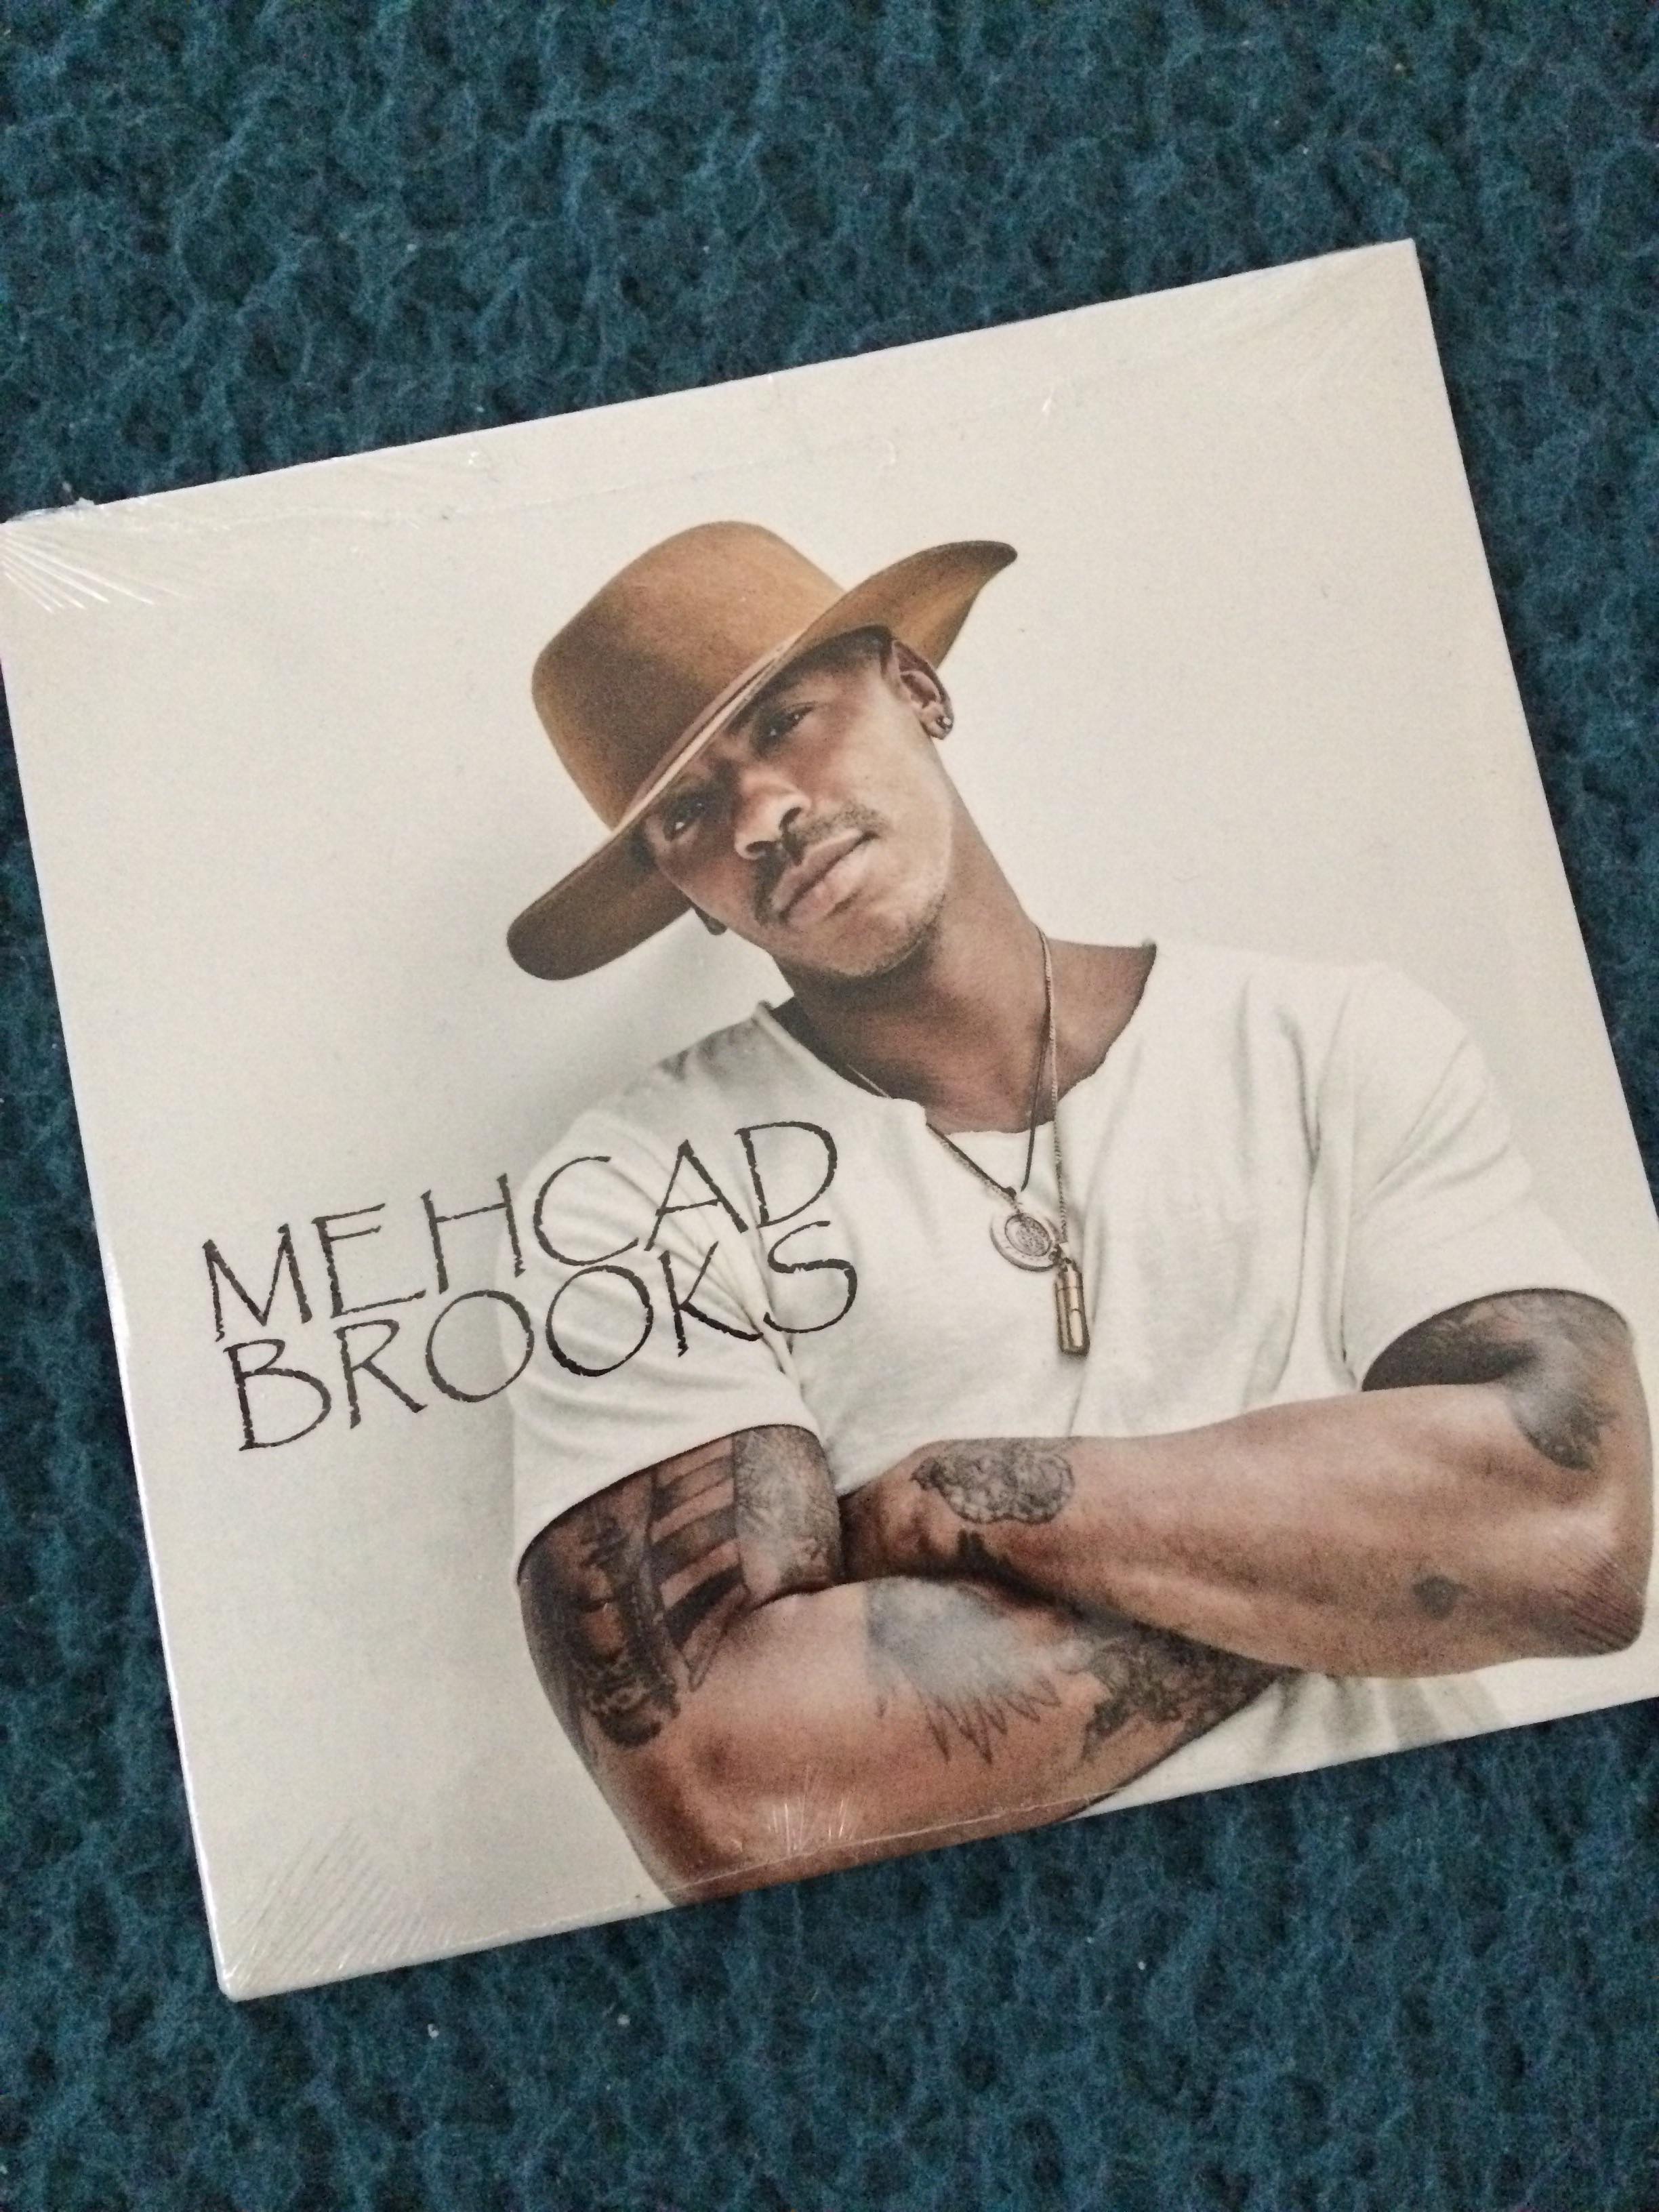 Photo of the cover of Mehcad Brooks demo album. He stands with his arms crossed in a white t-shirt and brown hat on a white background with Mehcad Brooks written over. This album was recieved from him at the Heroes and Villians Fan Fest London.